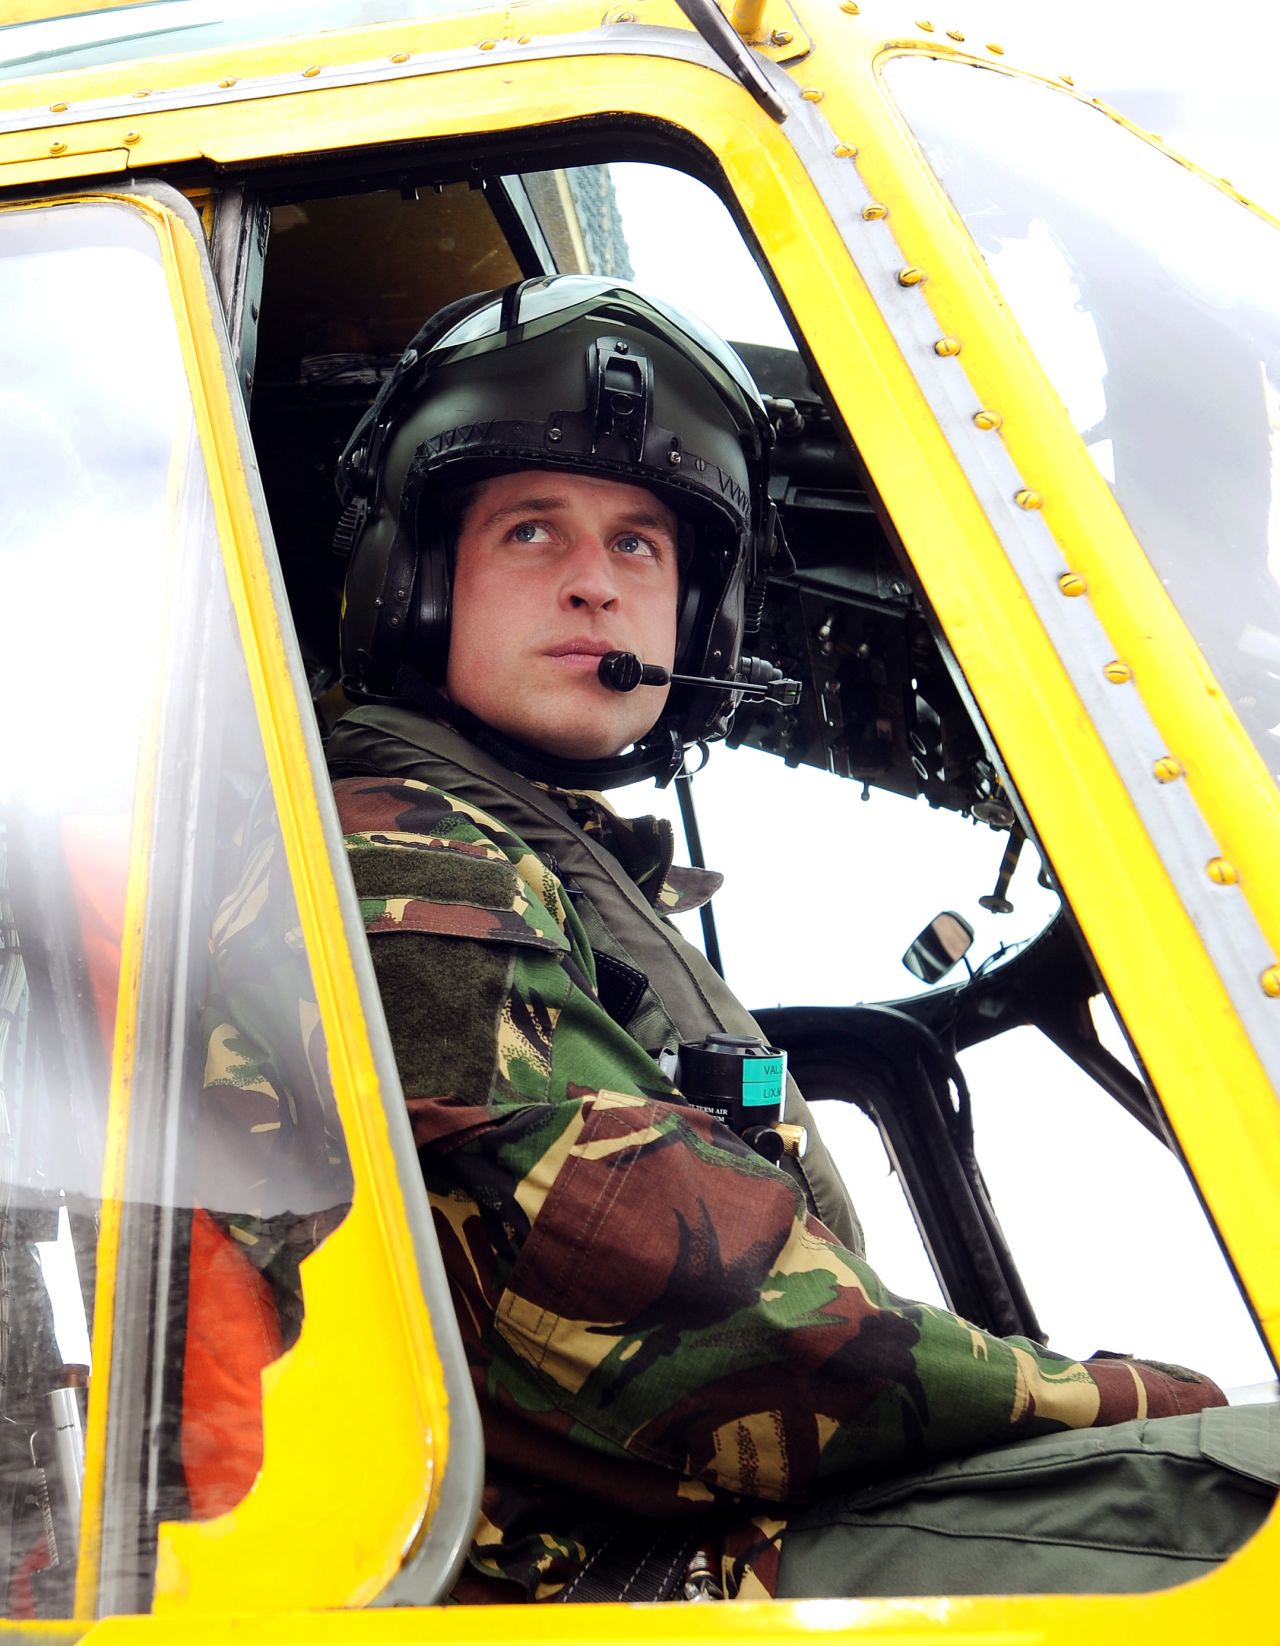 Britain's Prince William is deployed to the Falkland Islands on a six-week tour of duty as a search and rescue helicopter pilot.